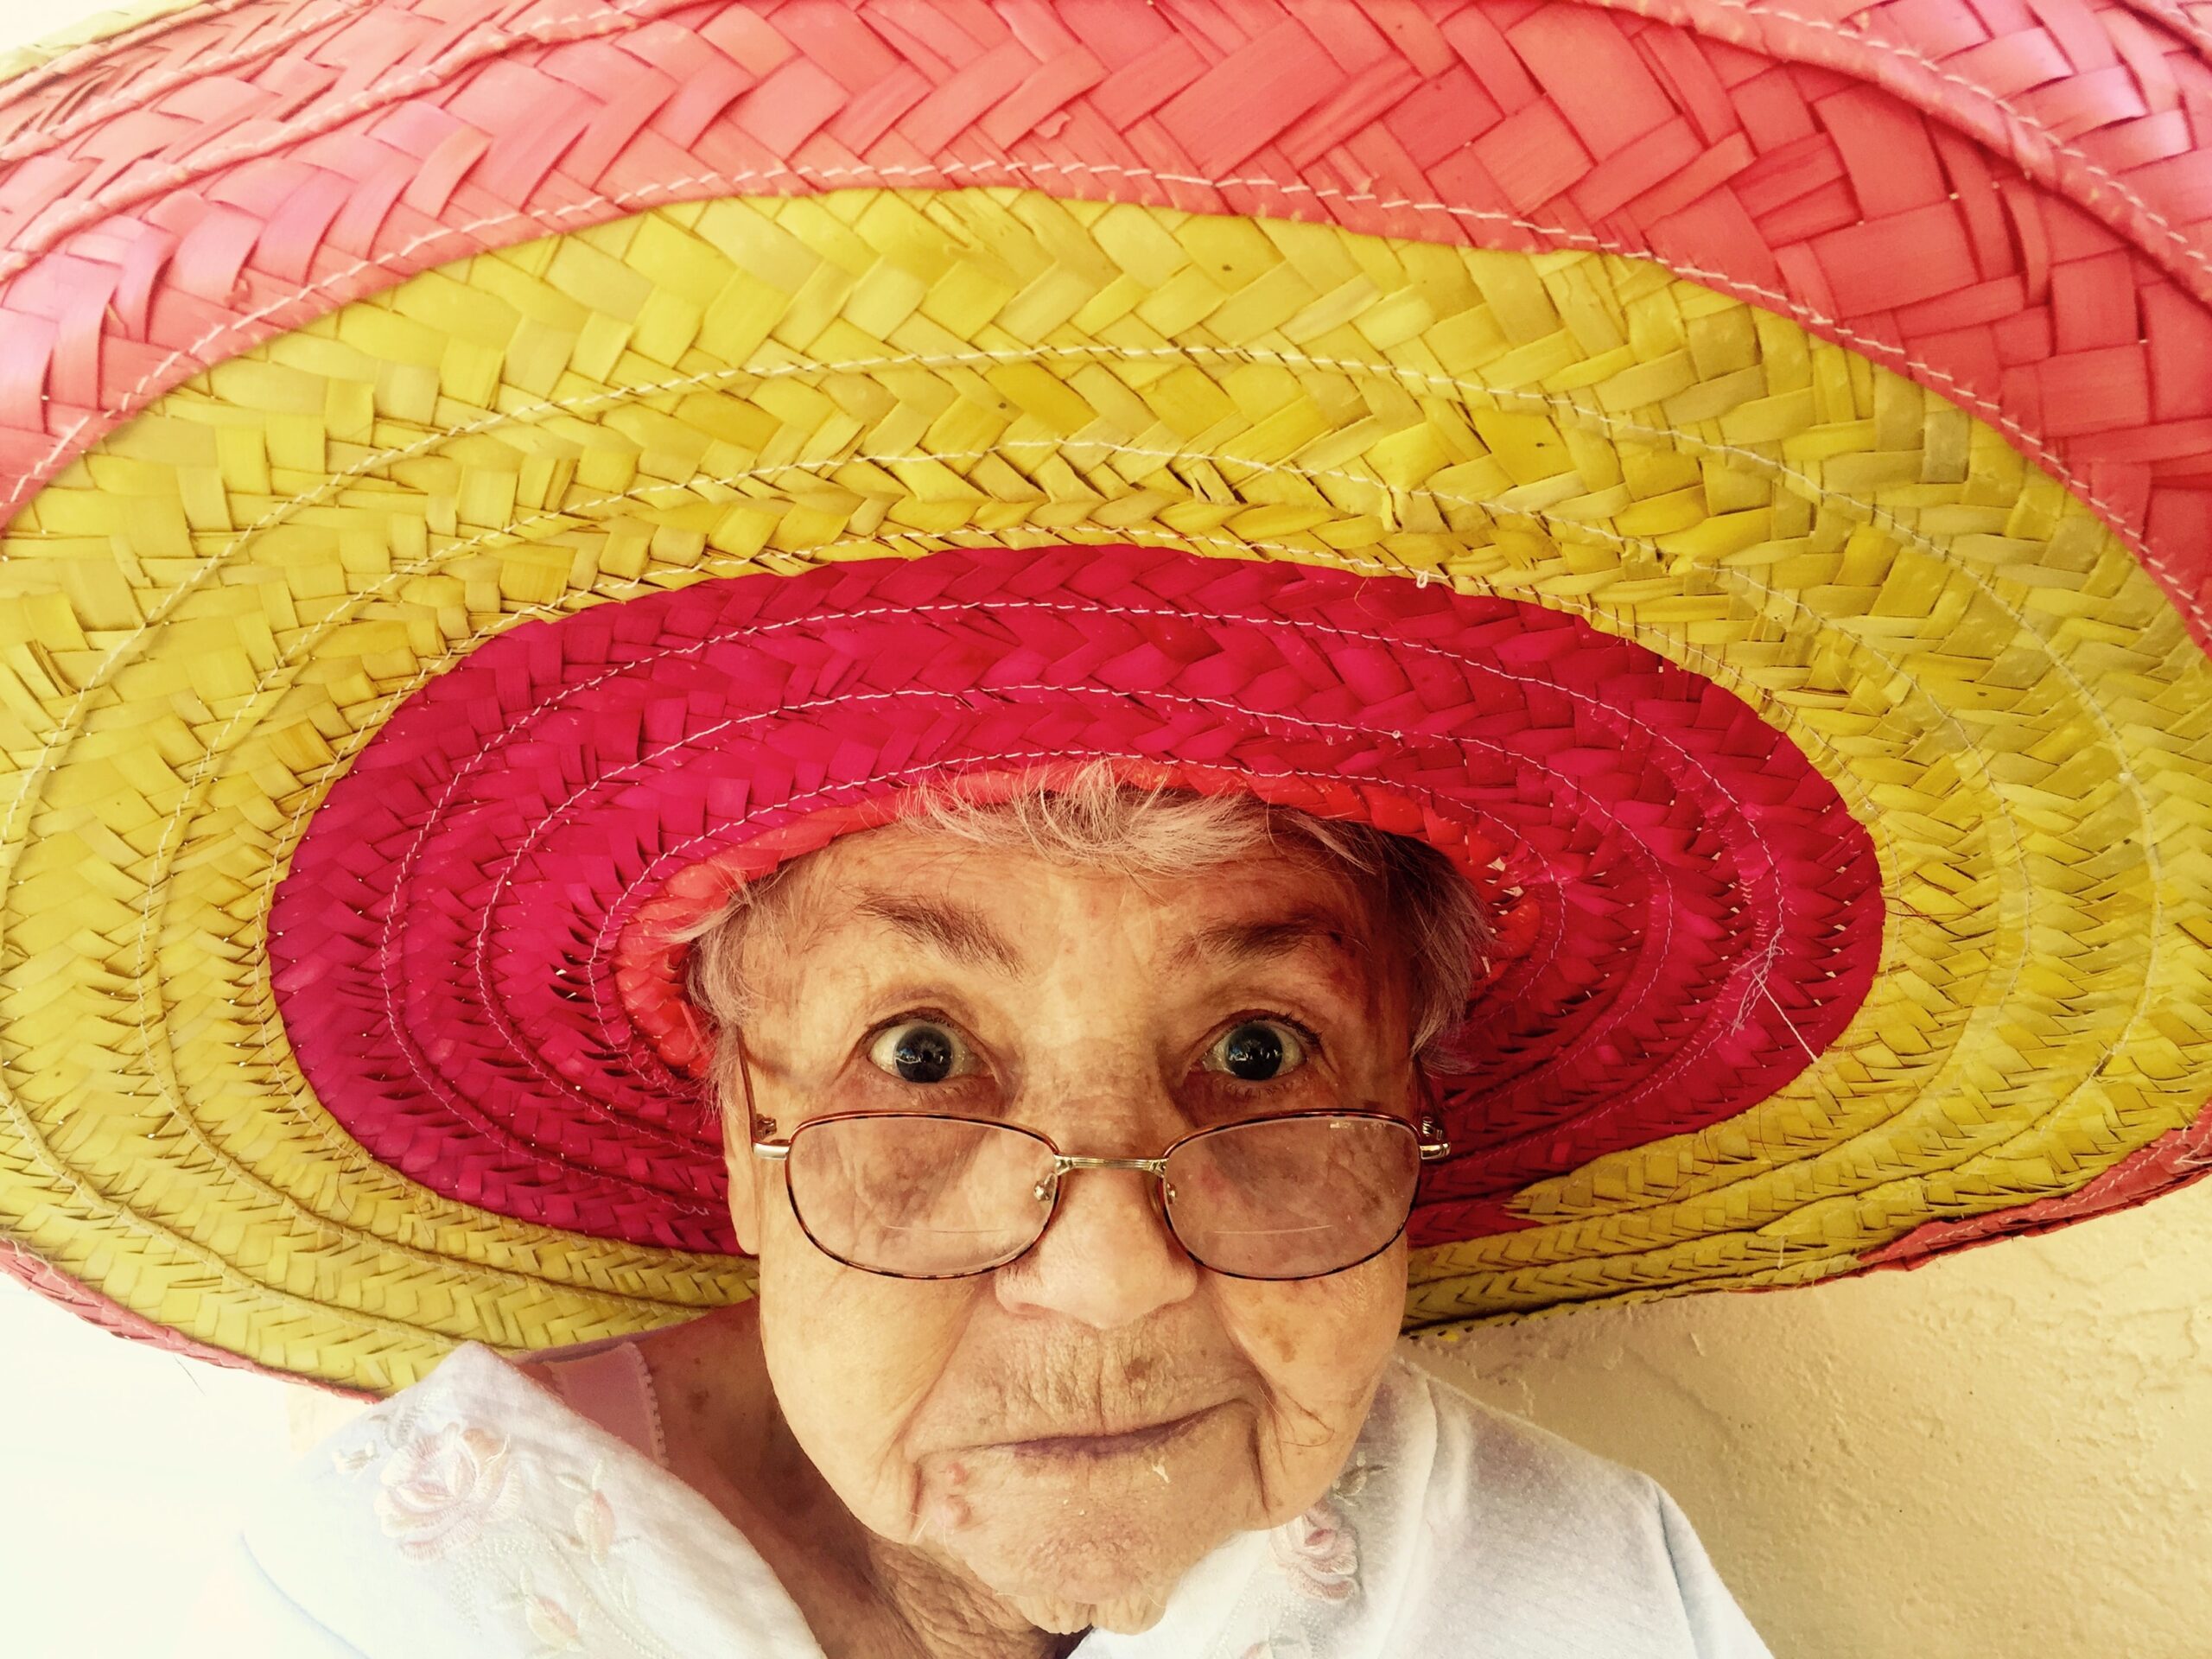 Elderly woman wearing a hat and glasses